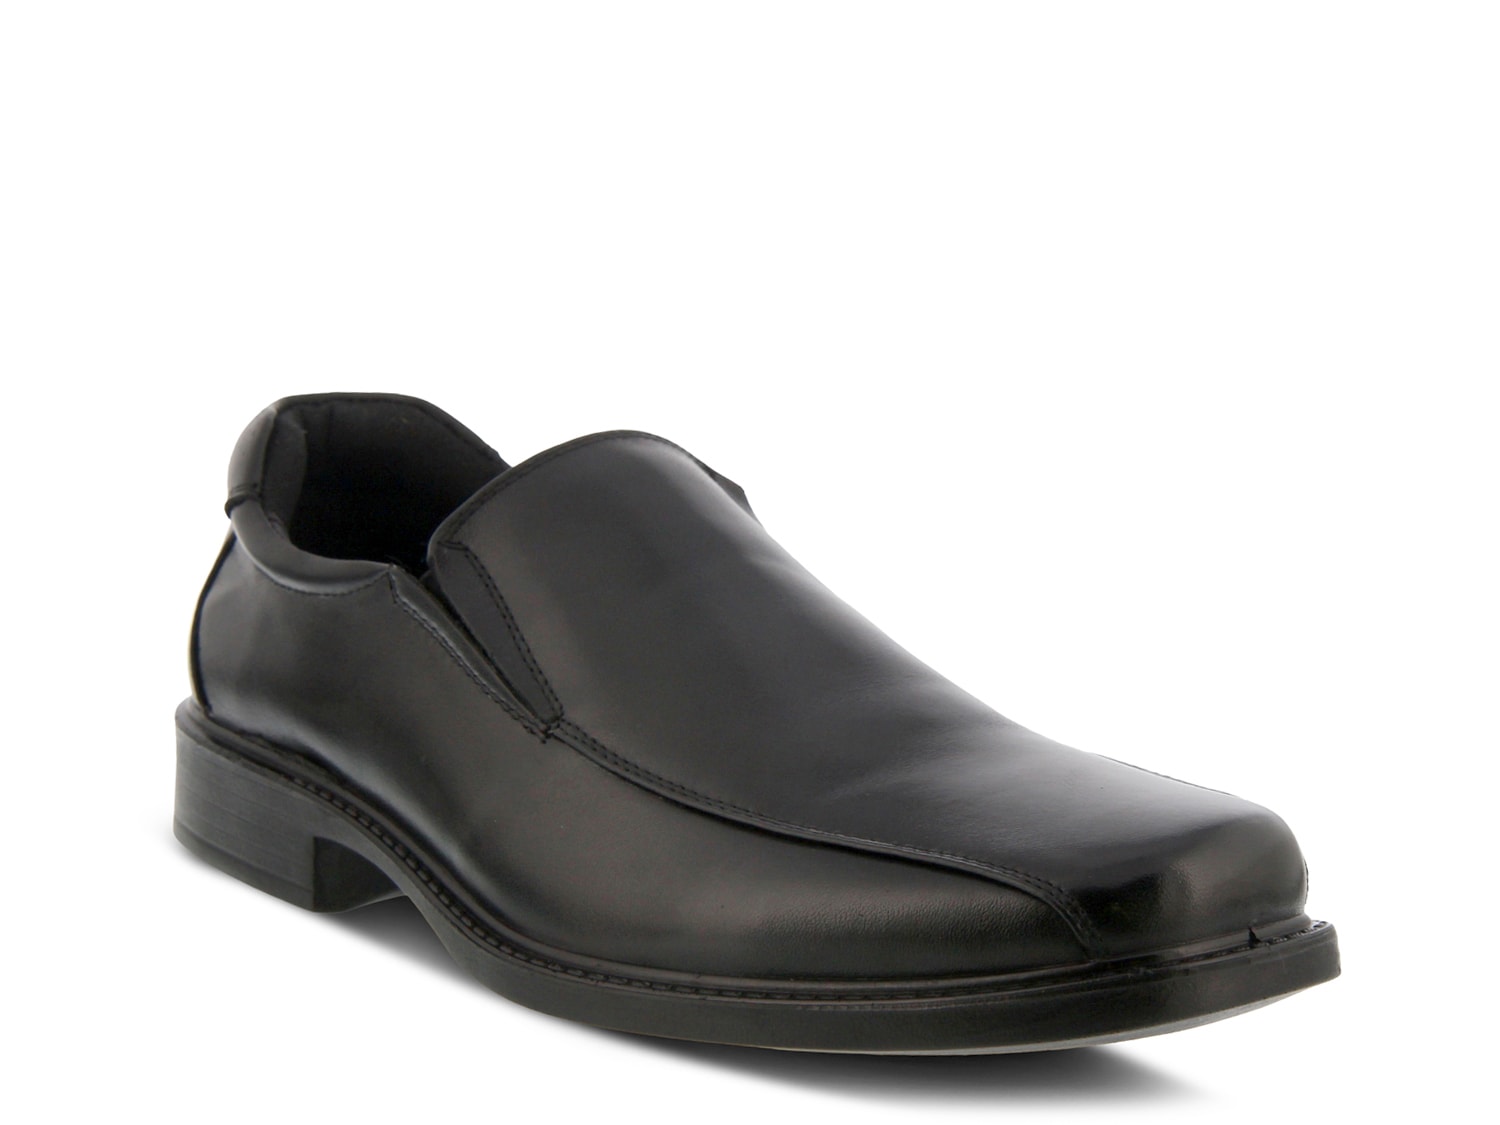 Spring Step Carson Slip-On - Free Shipping | DSW